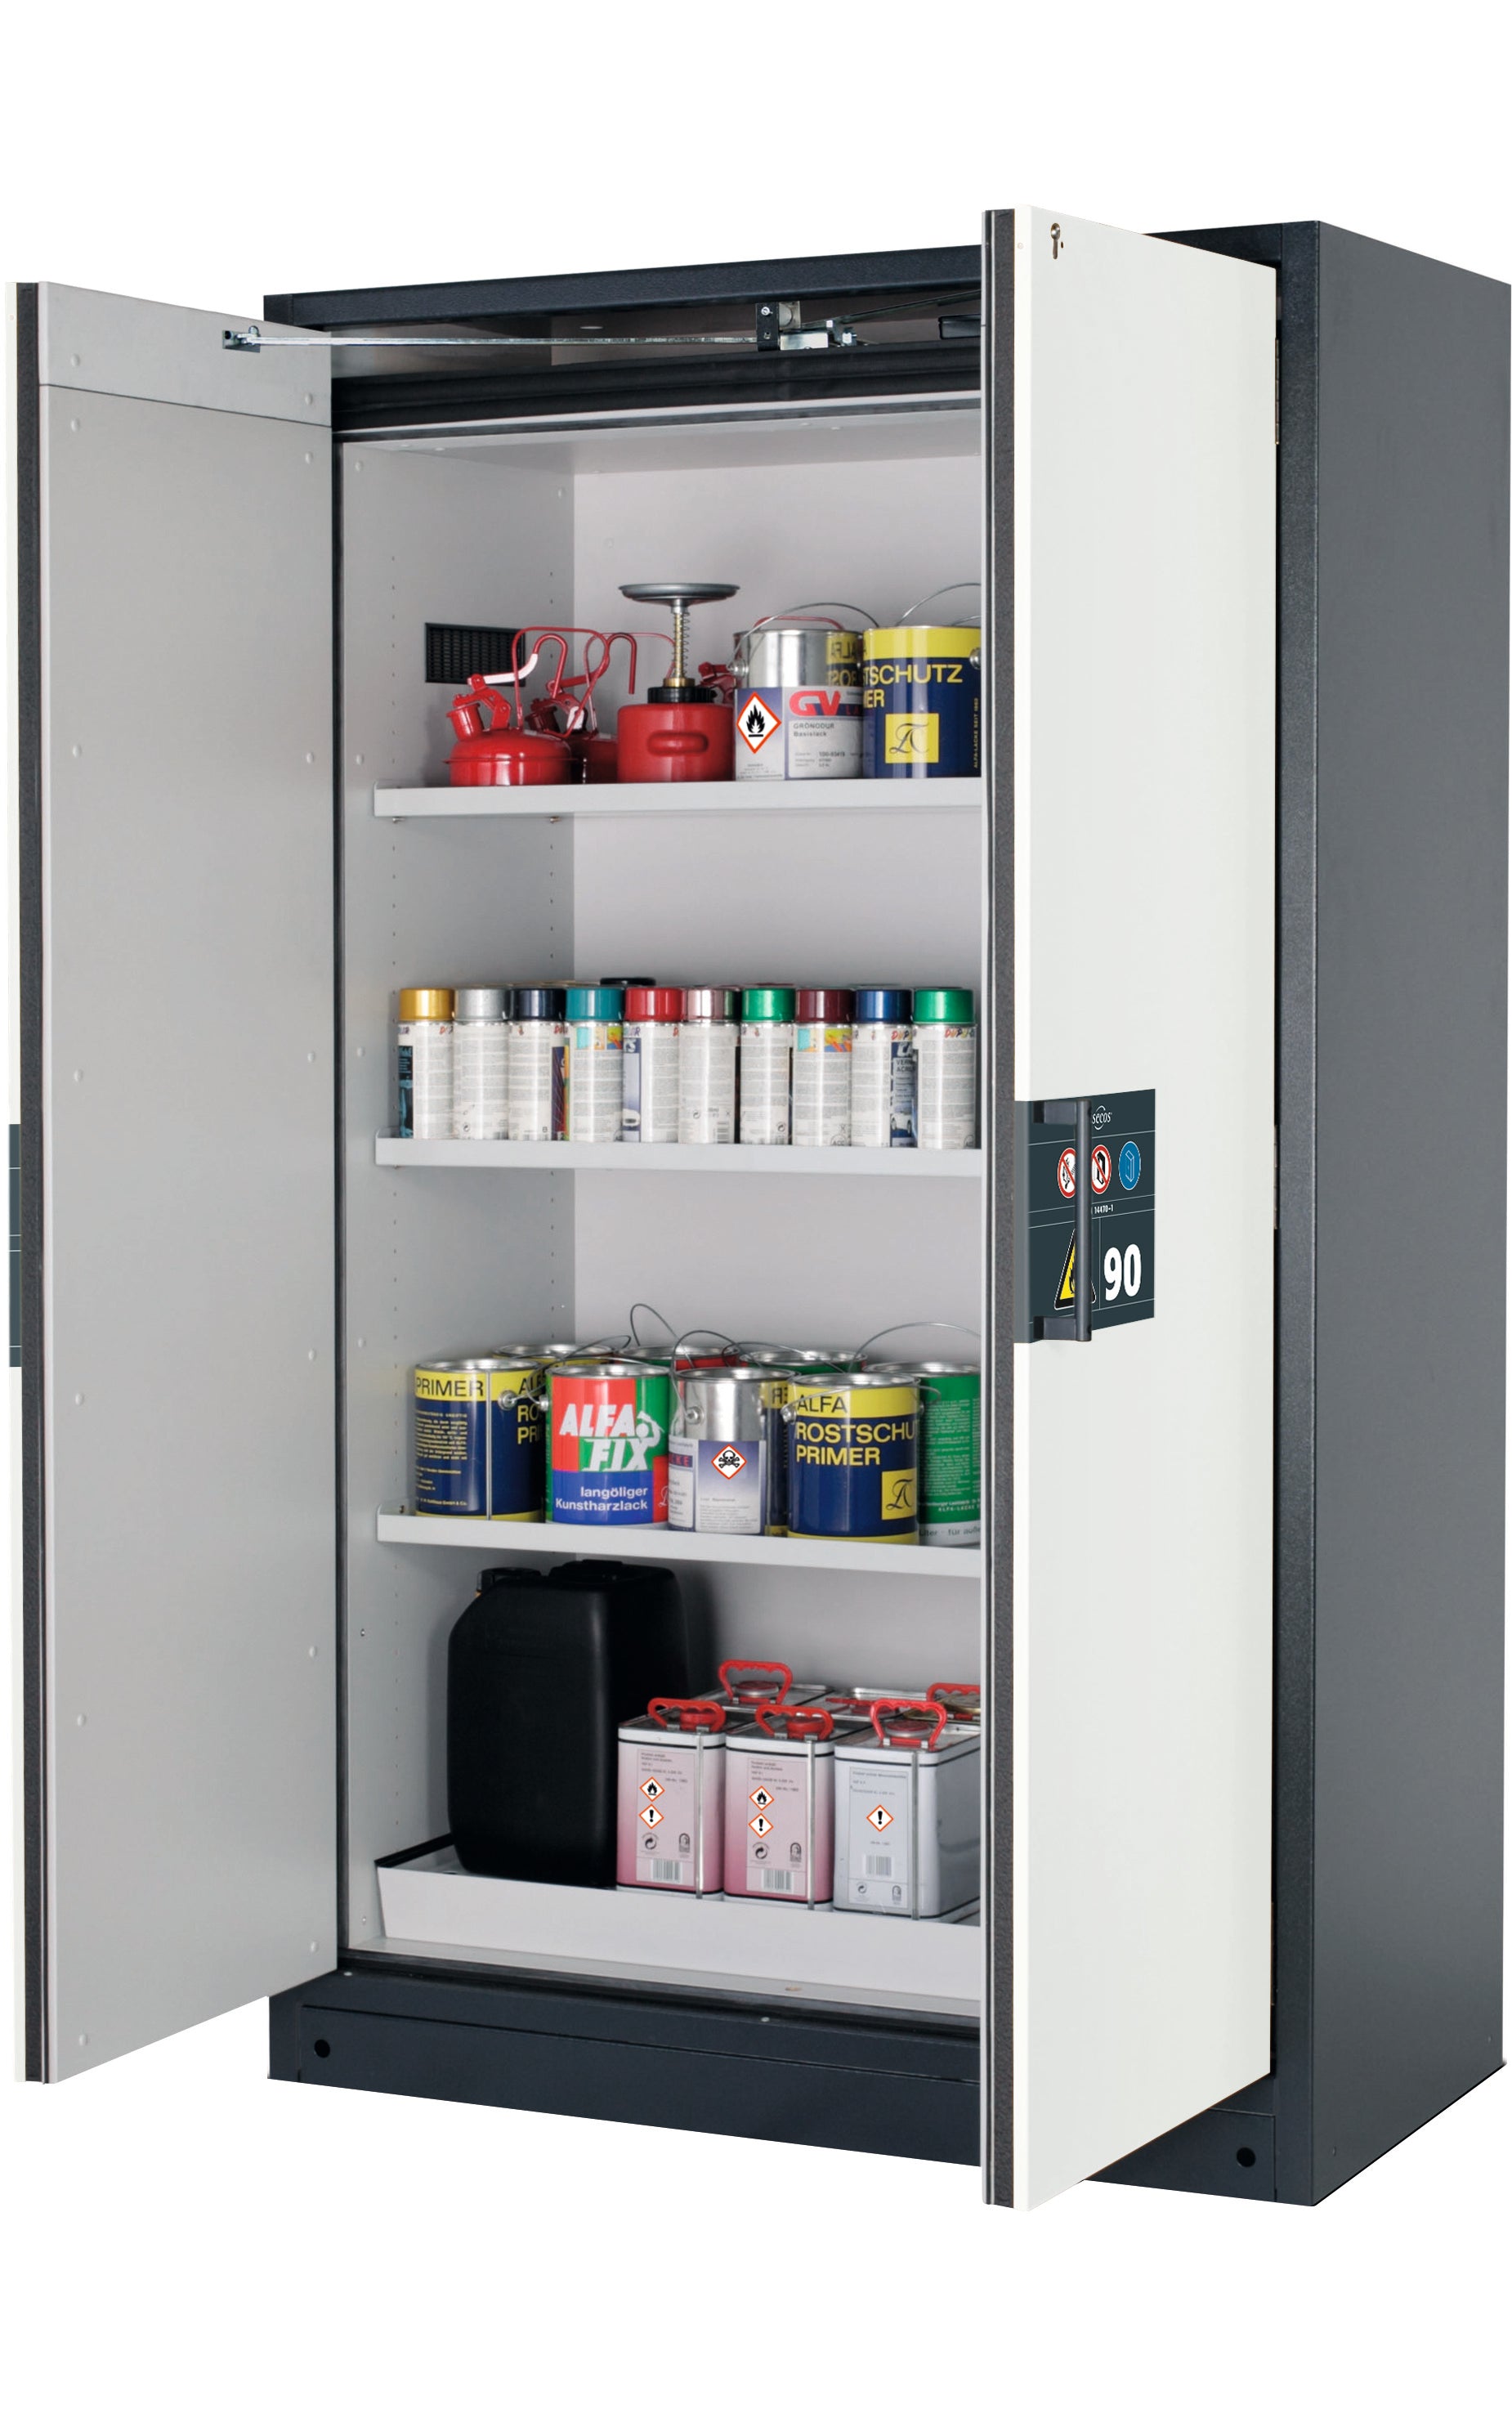 Type 90 safety storage cabinet Q-PEGASUS-90 model Q90.195.120.WDAC in pure white RAL 9010 with 3x shelf standard (sheet steel),